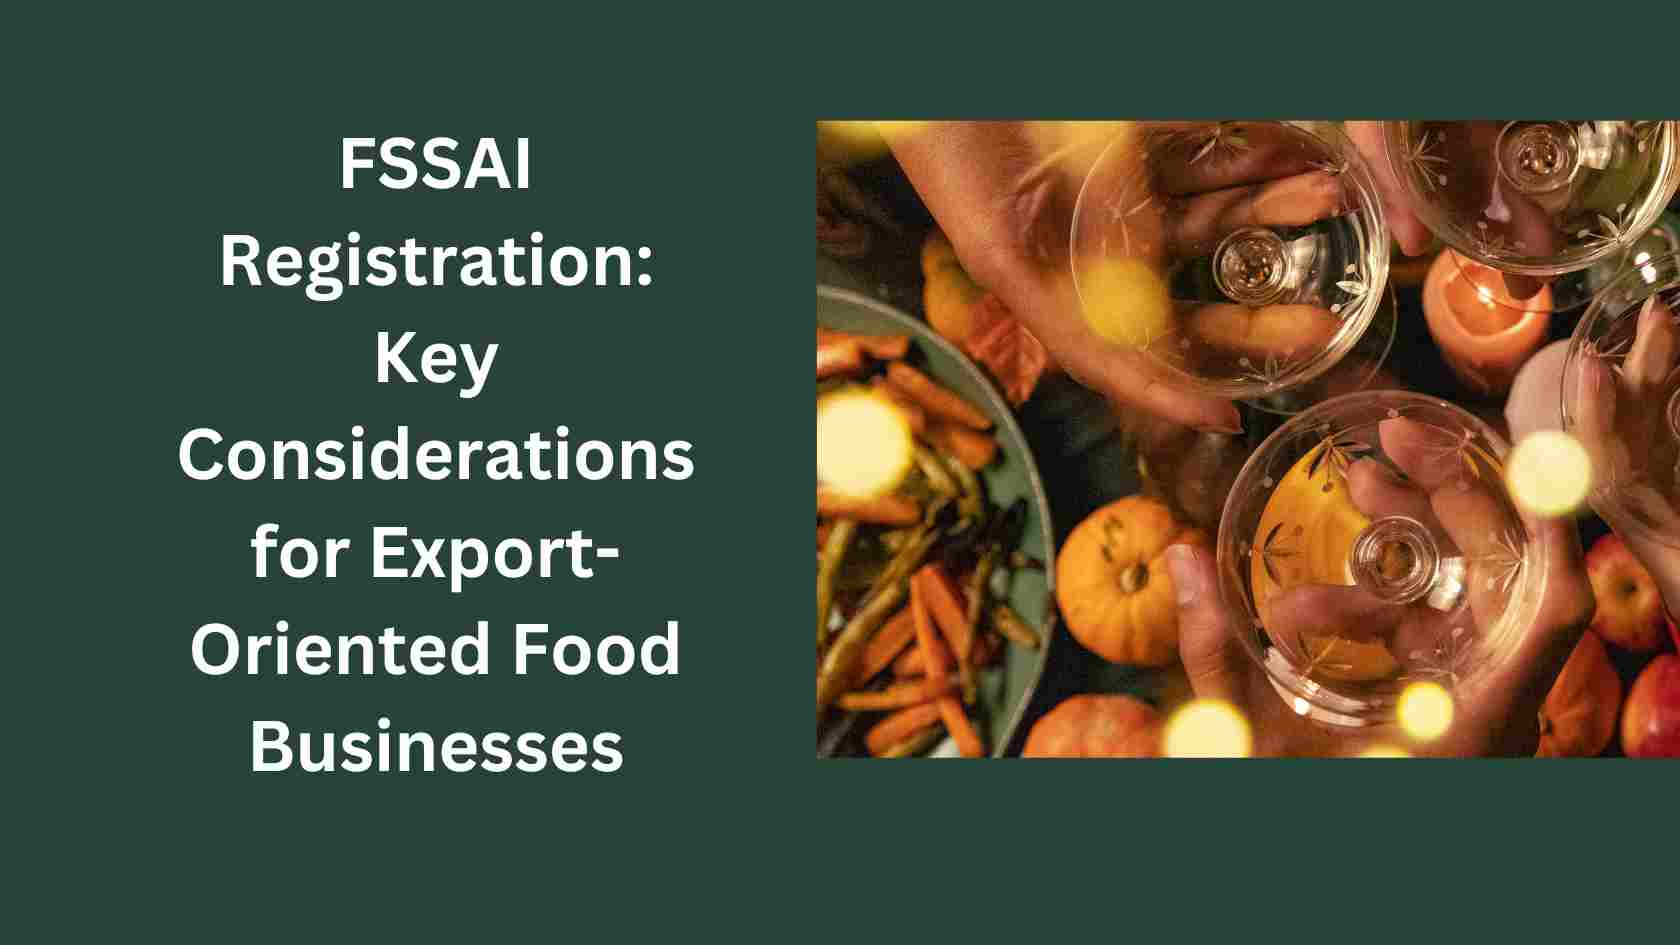 FSSAI Registration: Key Considerations for Export-Oriented Food Businesses